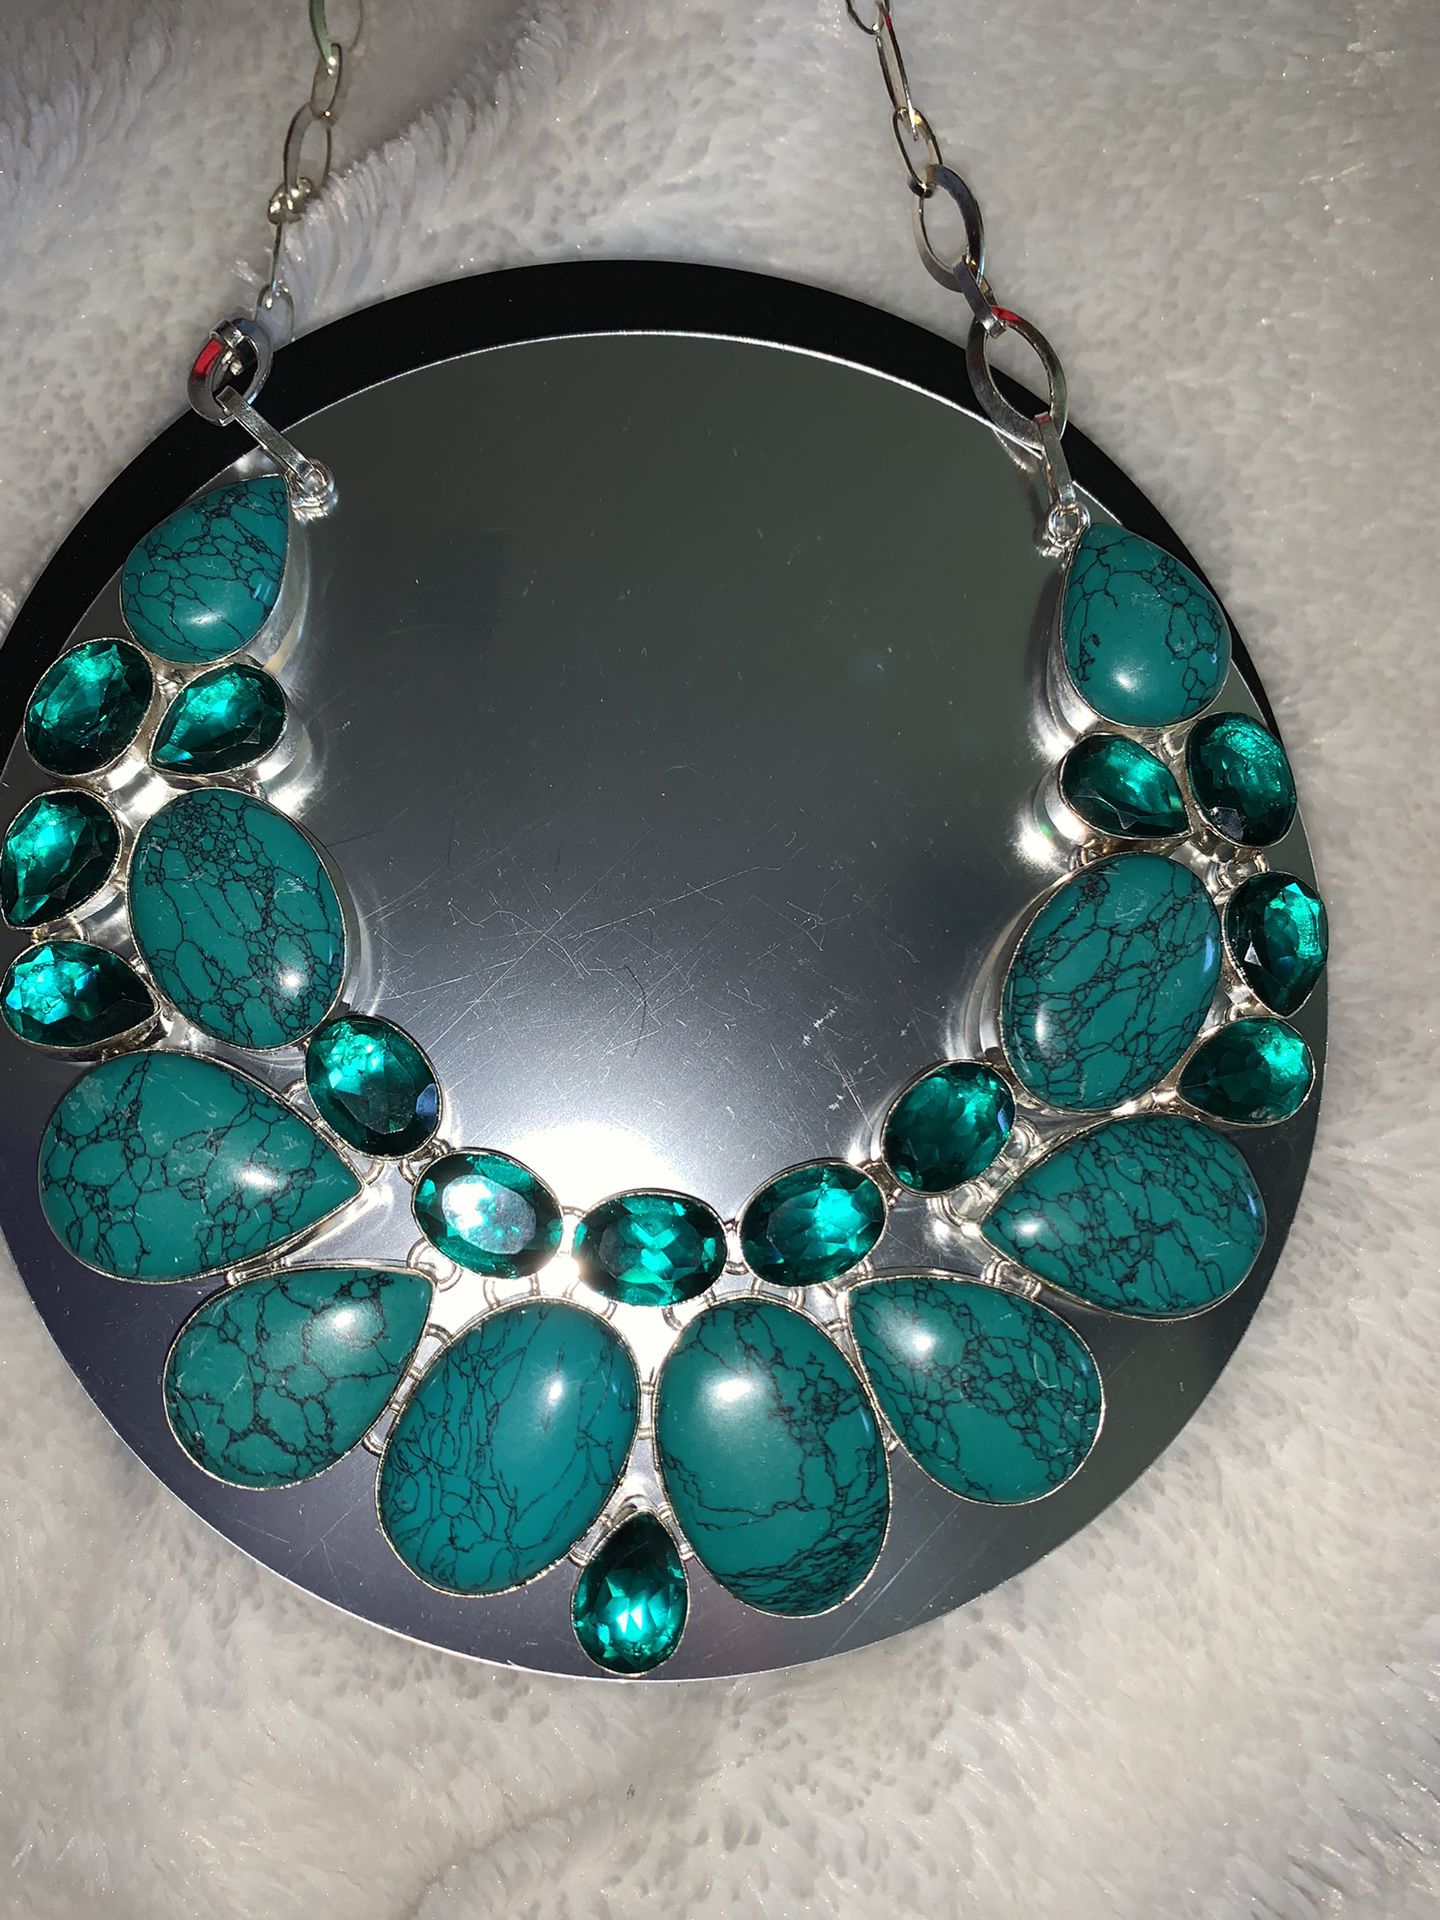 NEW Sterling, Turquoise & Blue Topaz Necklace. 